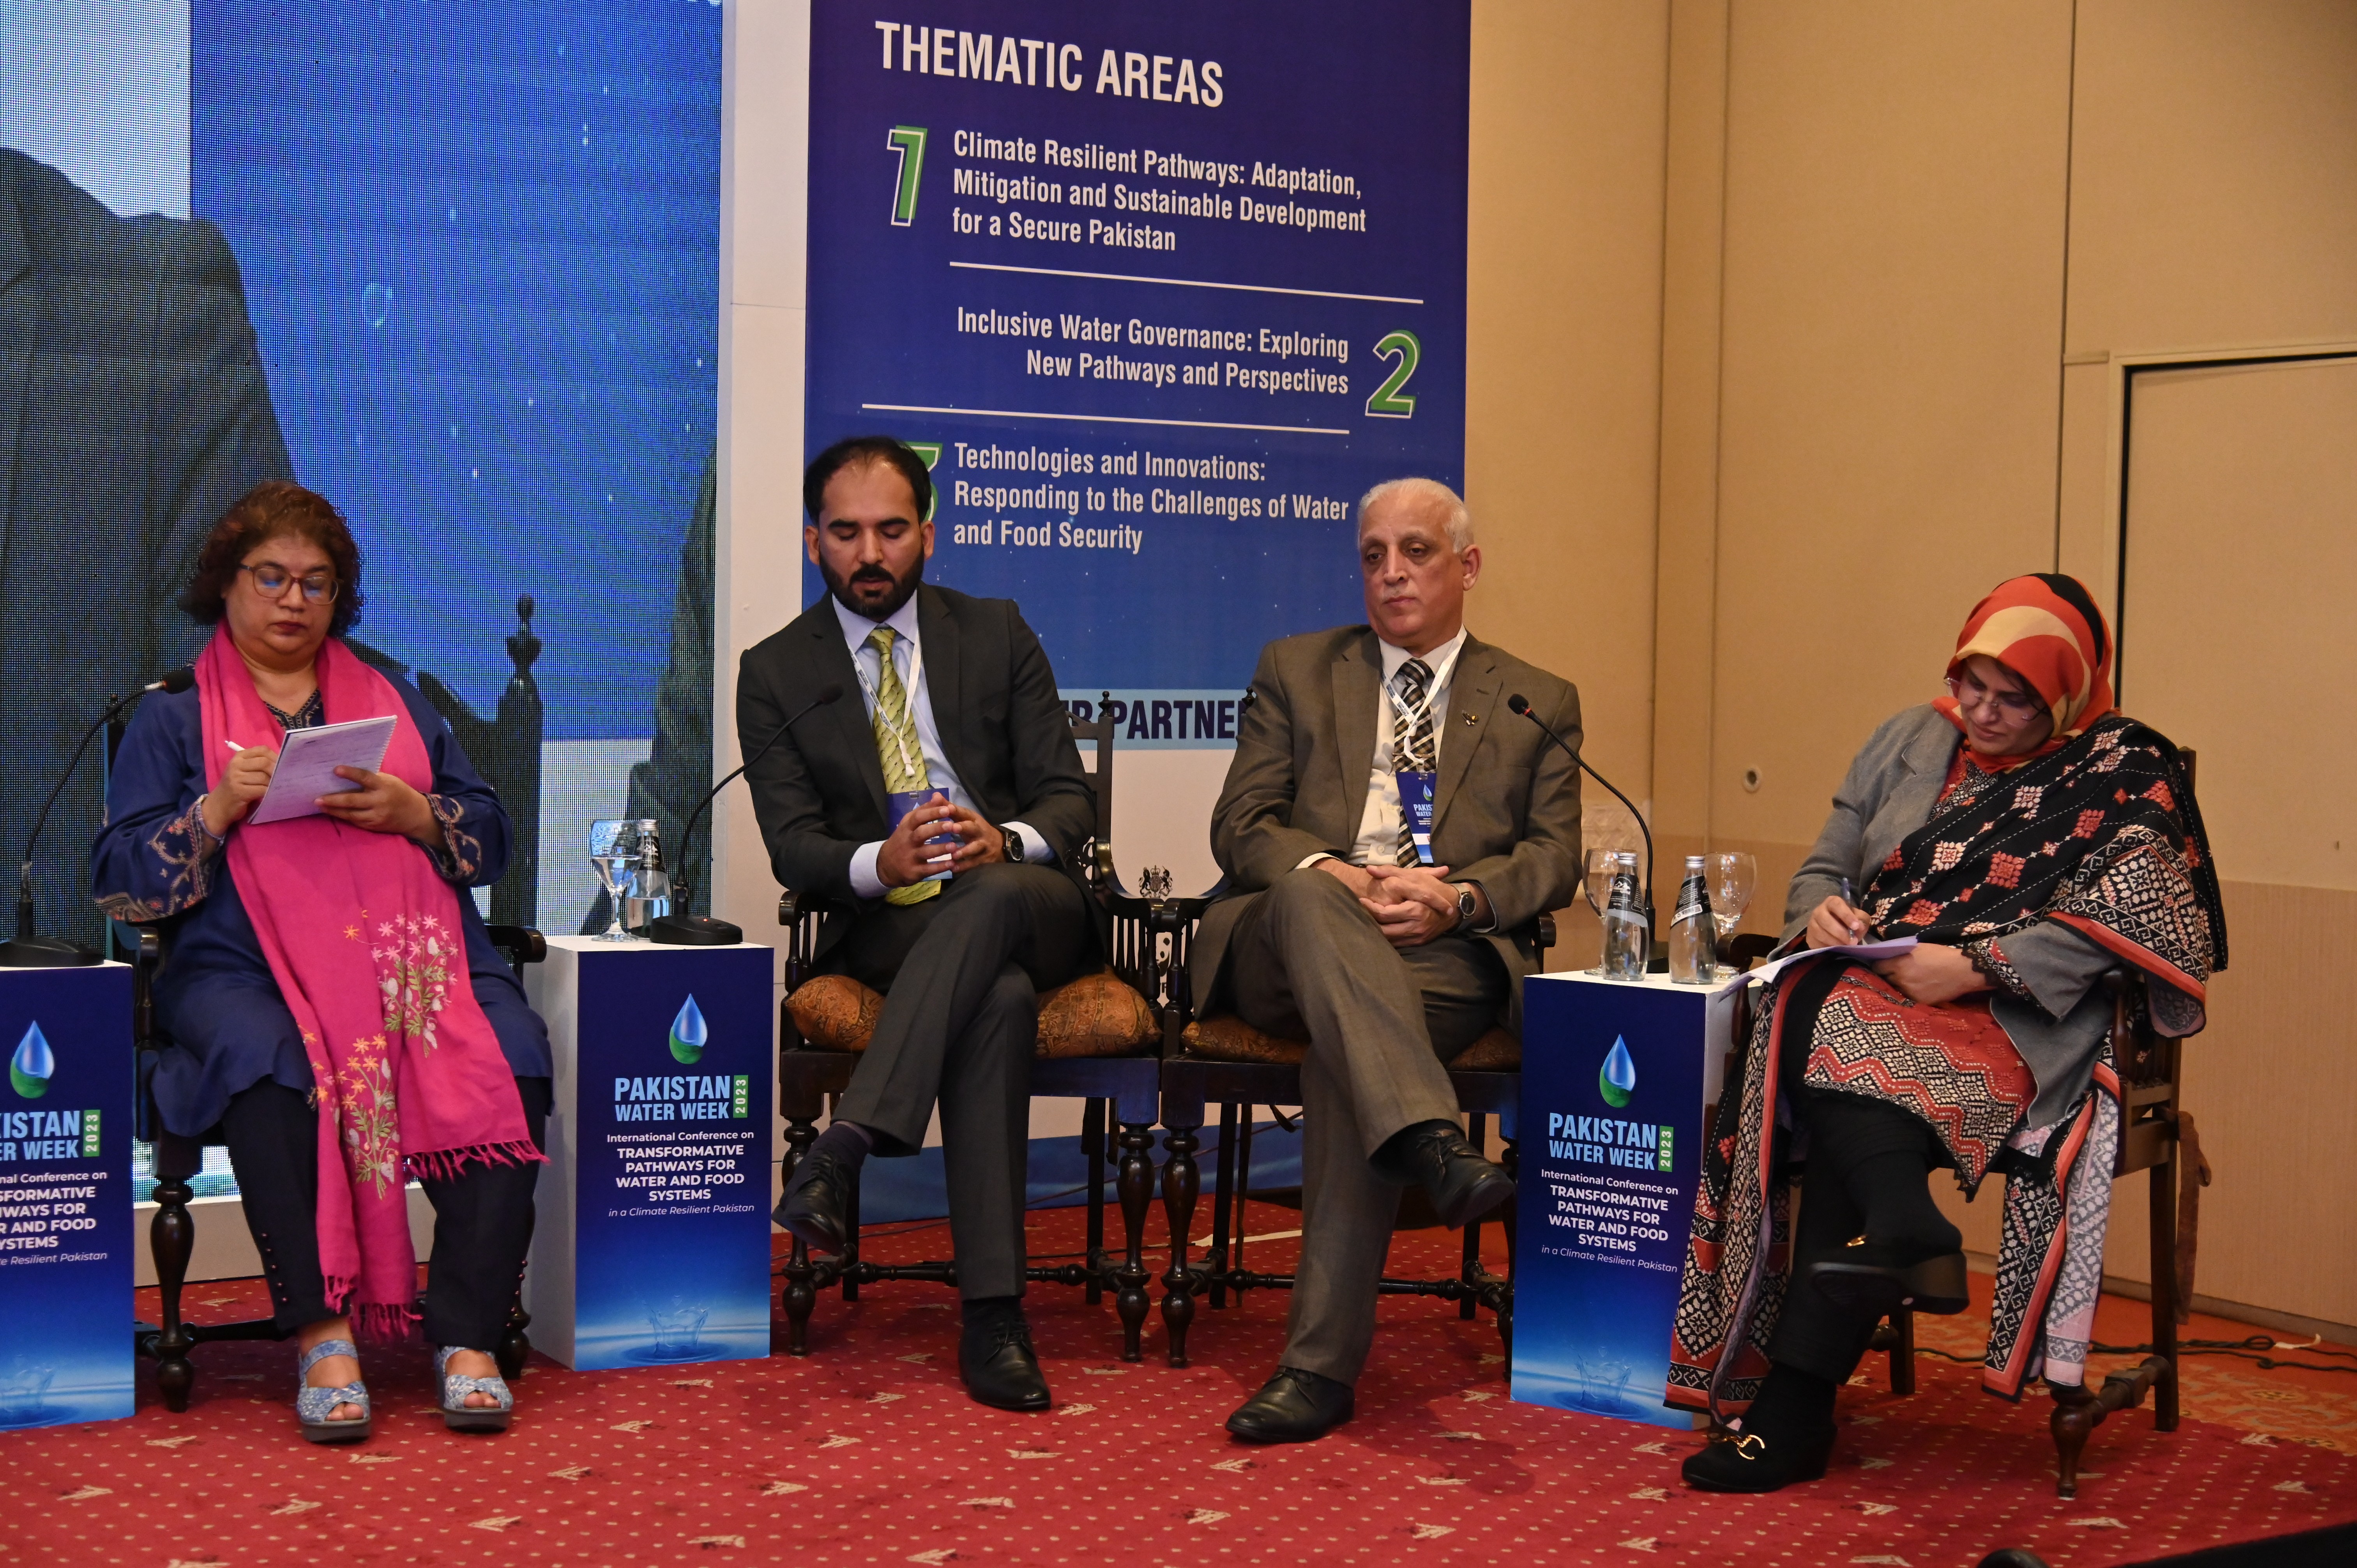 the penal discussion at an International Conference & National Workshop on "PAKISTAN WATER WEEK 2023:TRANSFORMATIVE PATHWAYS FOR WATER AND FOOD SYSTEM"